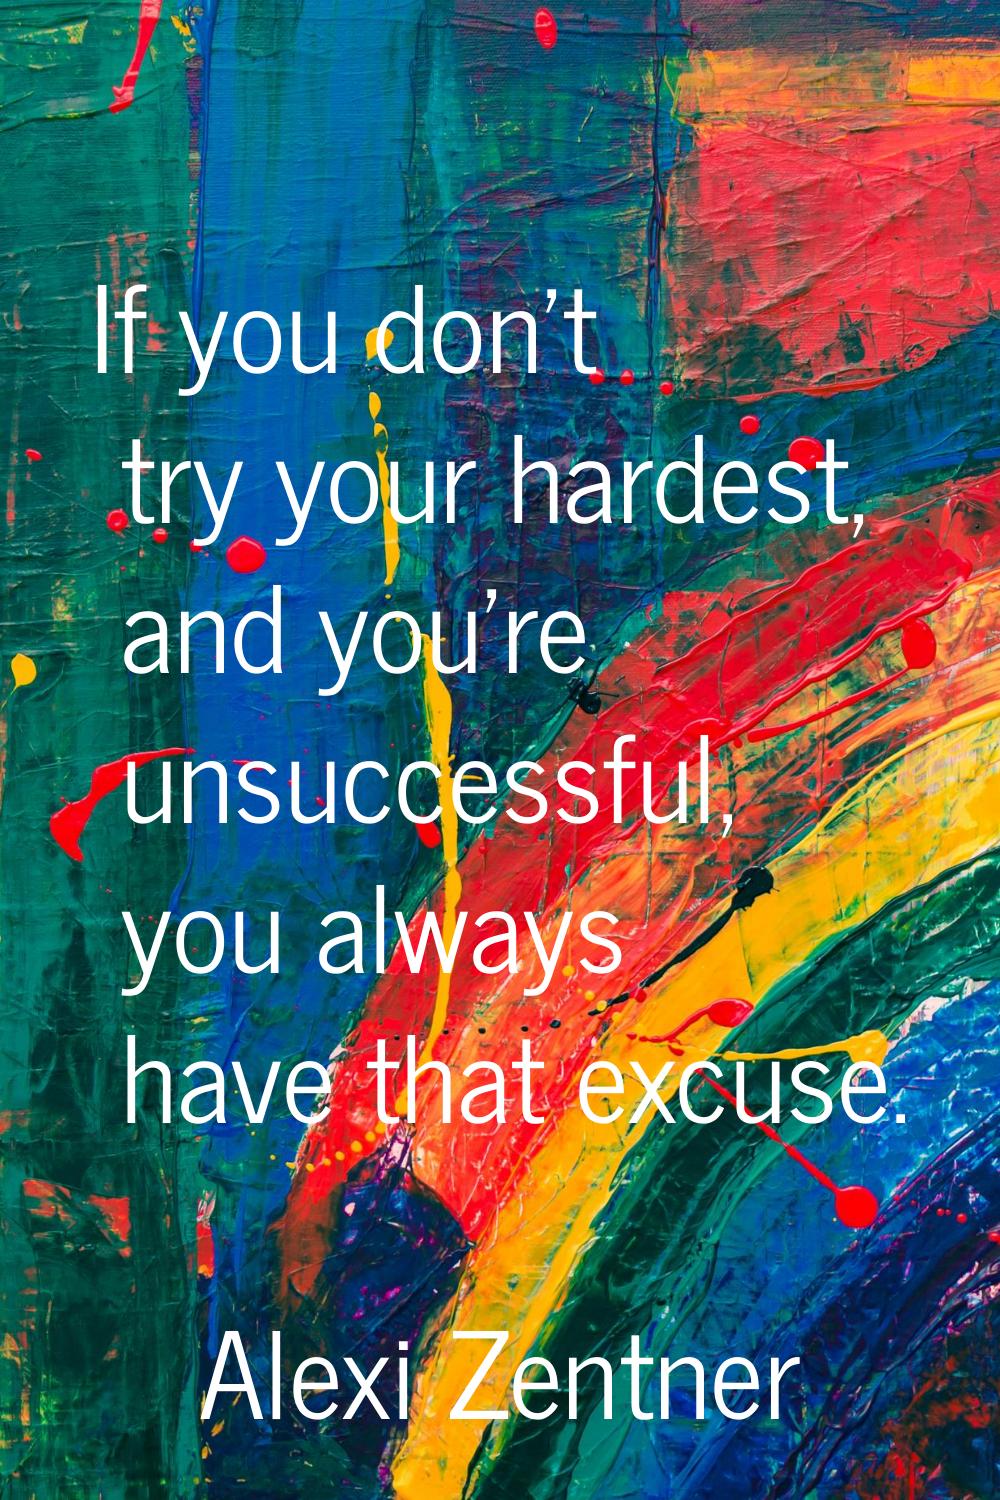 If you don't try your hardest, and you're unsuccessful, you always have that excuse.